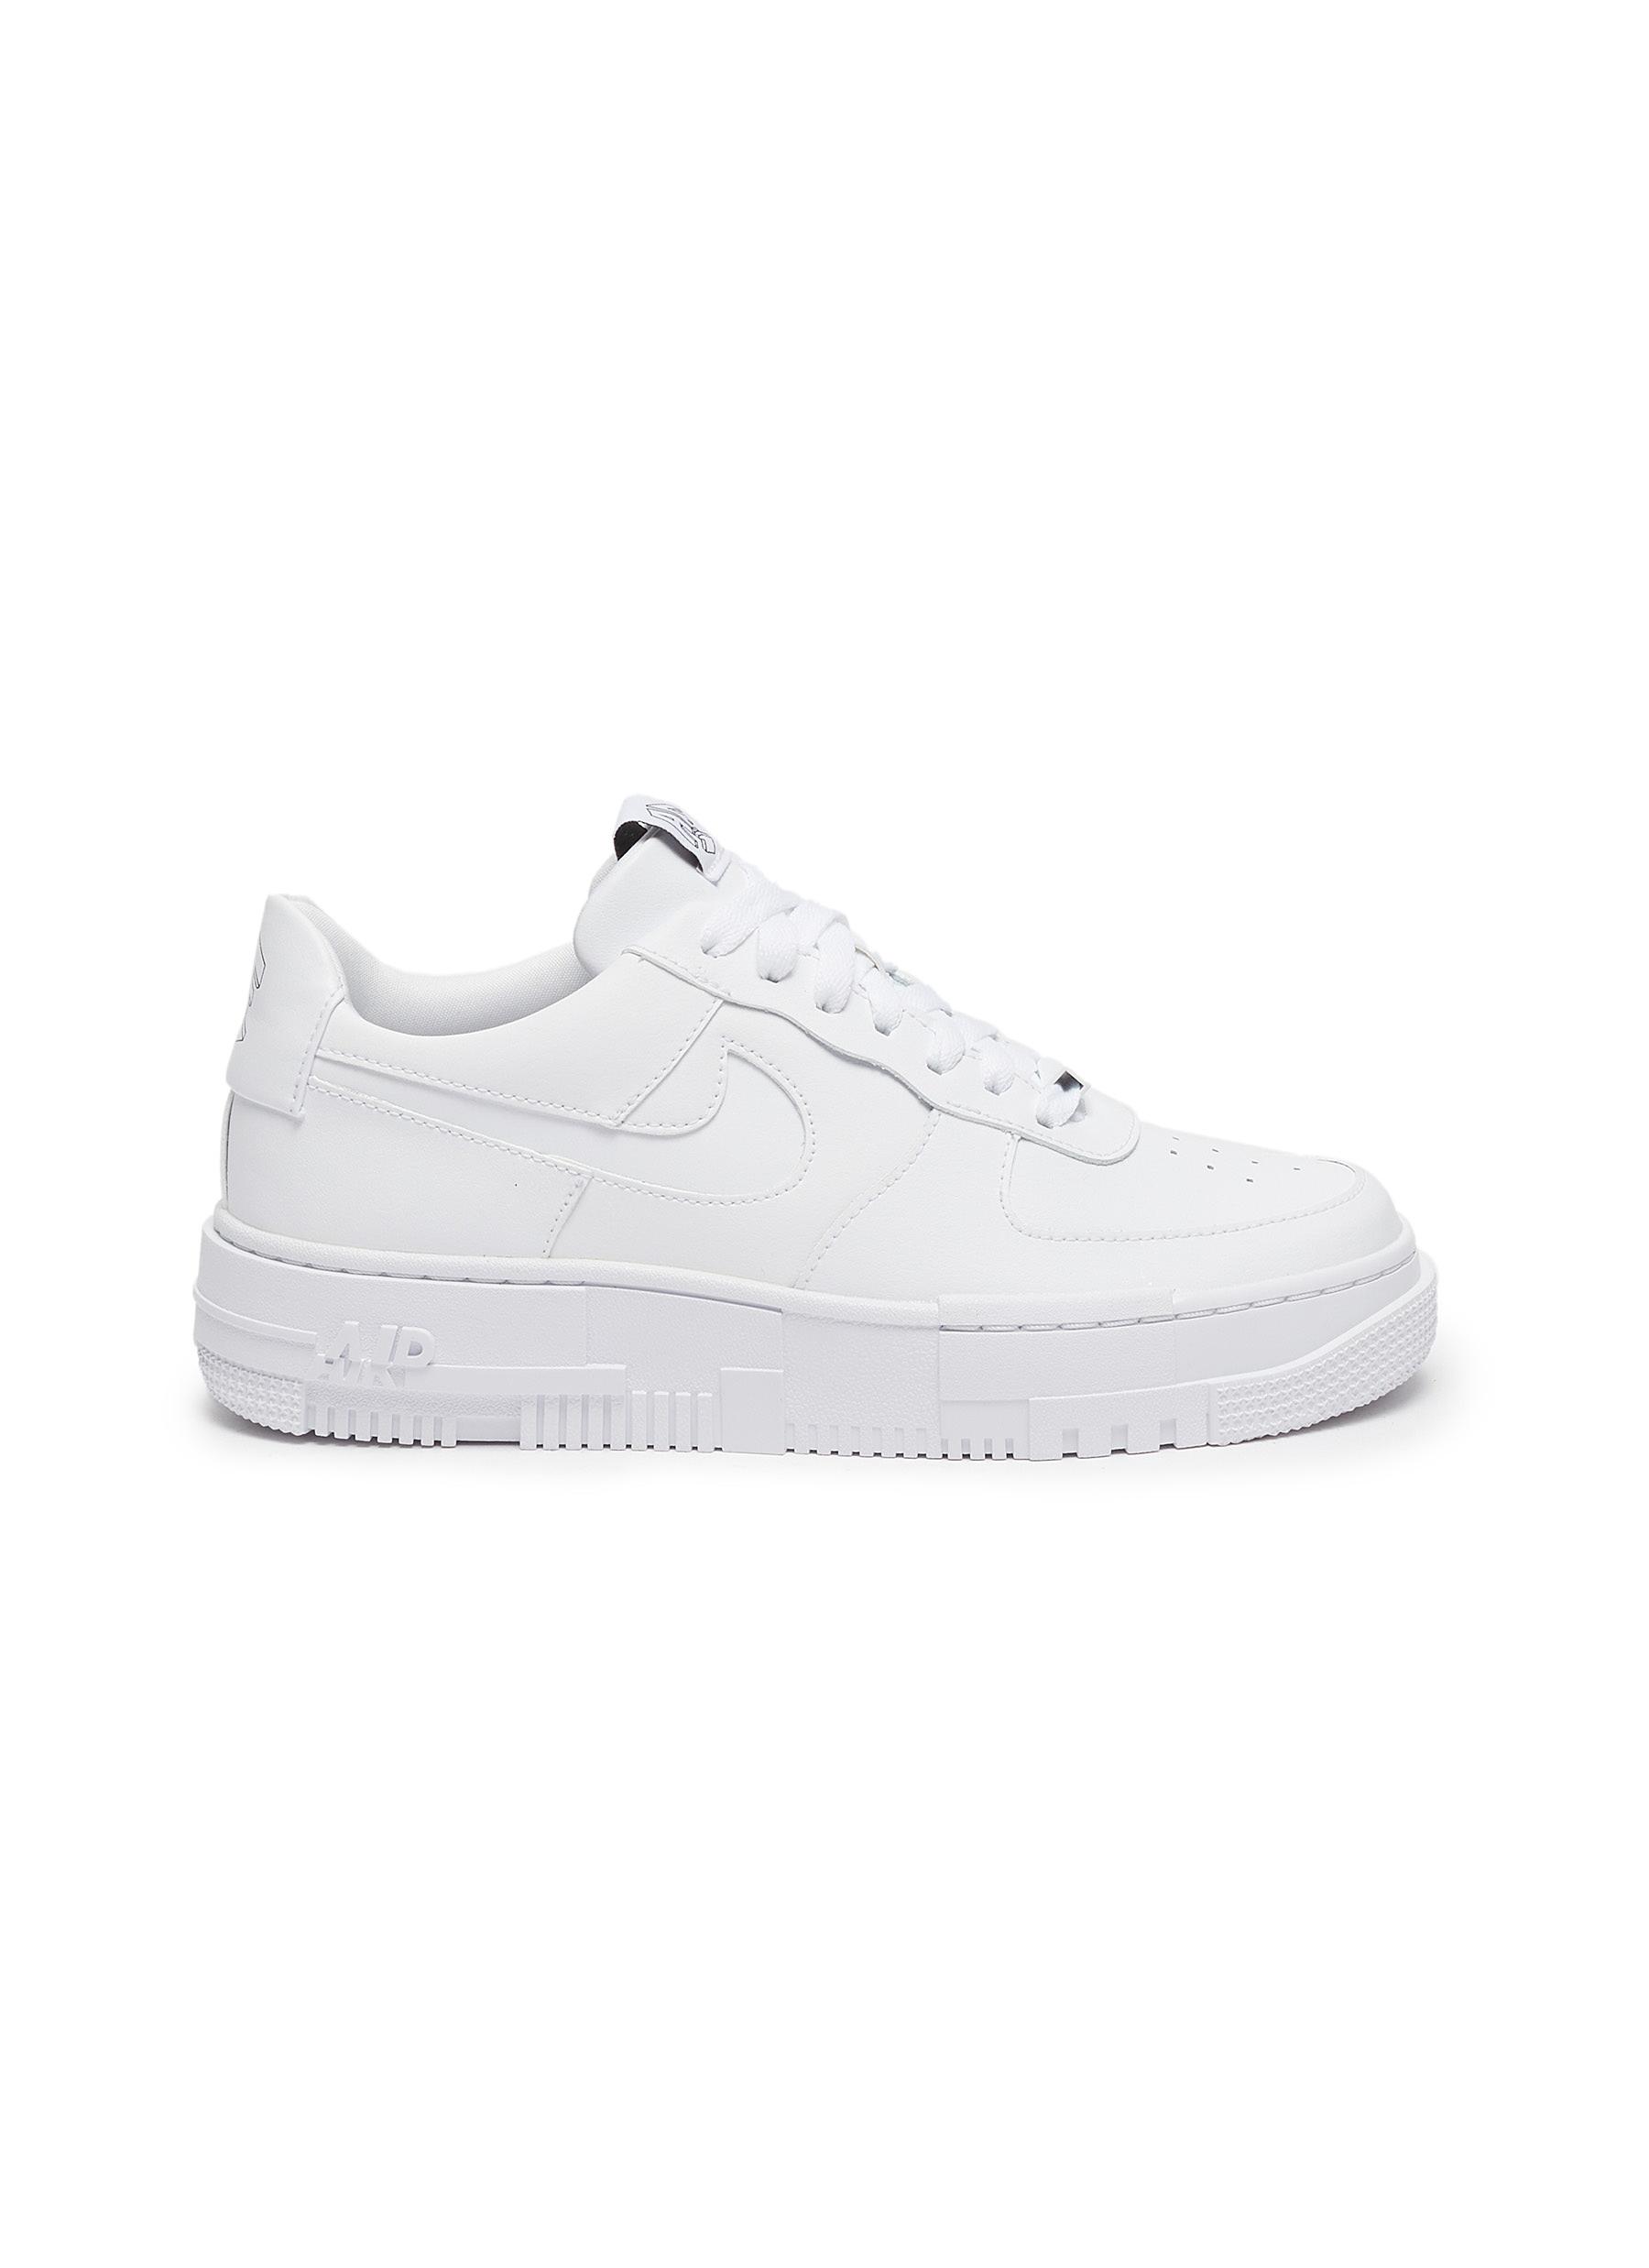 womens white low air force 1